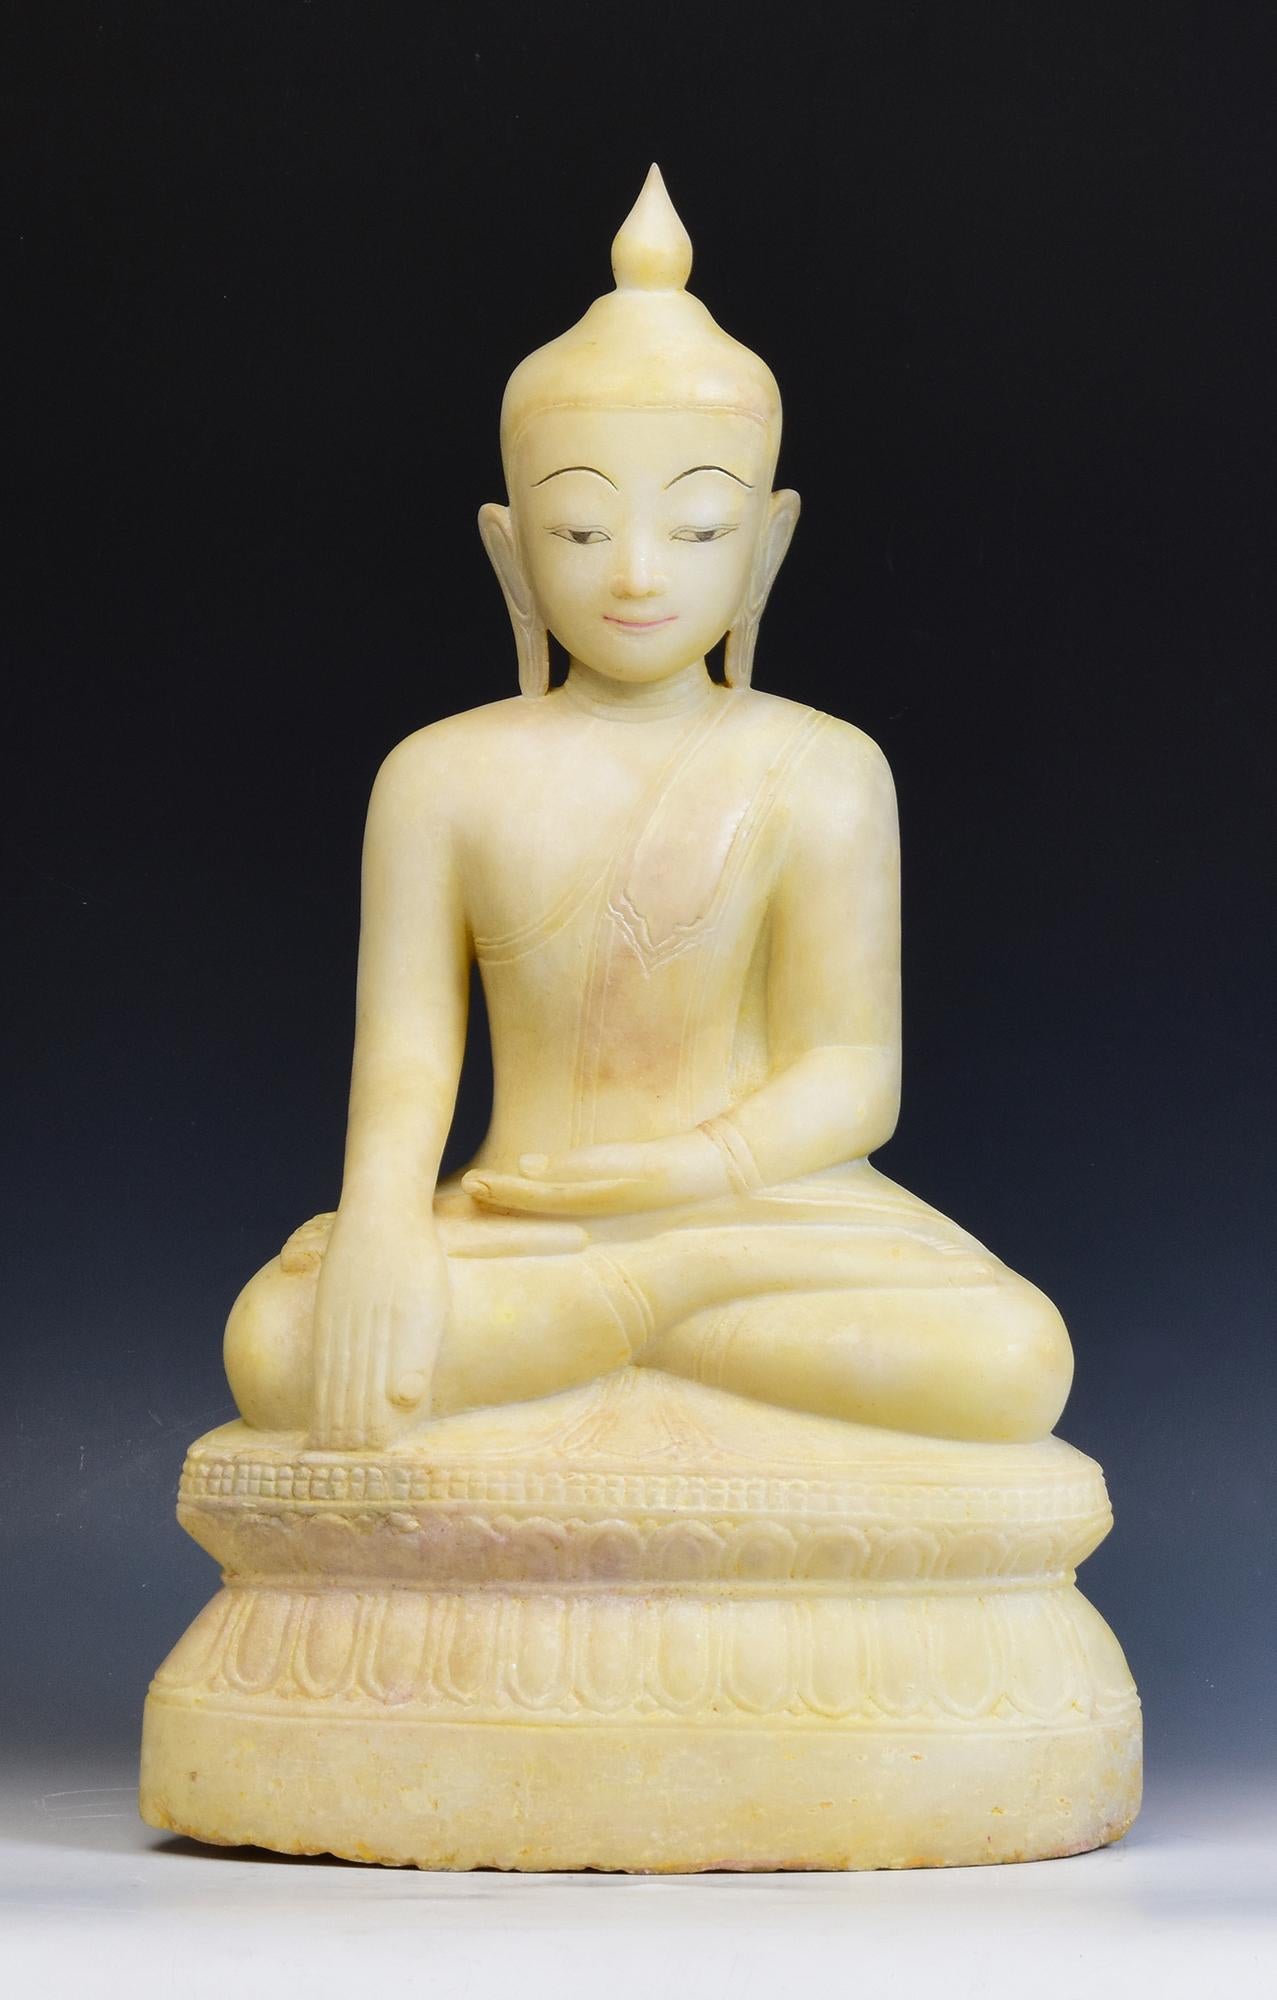 17th - 18th Century, Shan, Antique Burmese Alabaster Marble Seated Buddha Statue 9